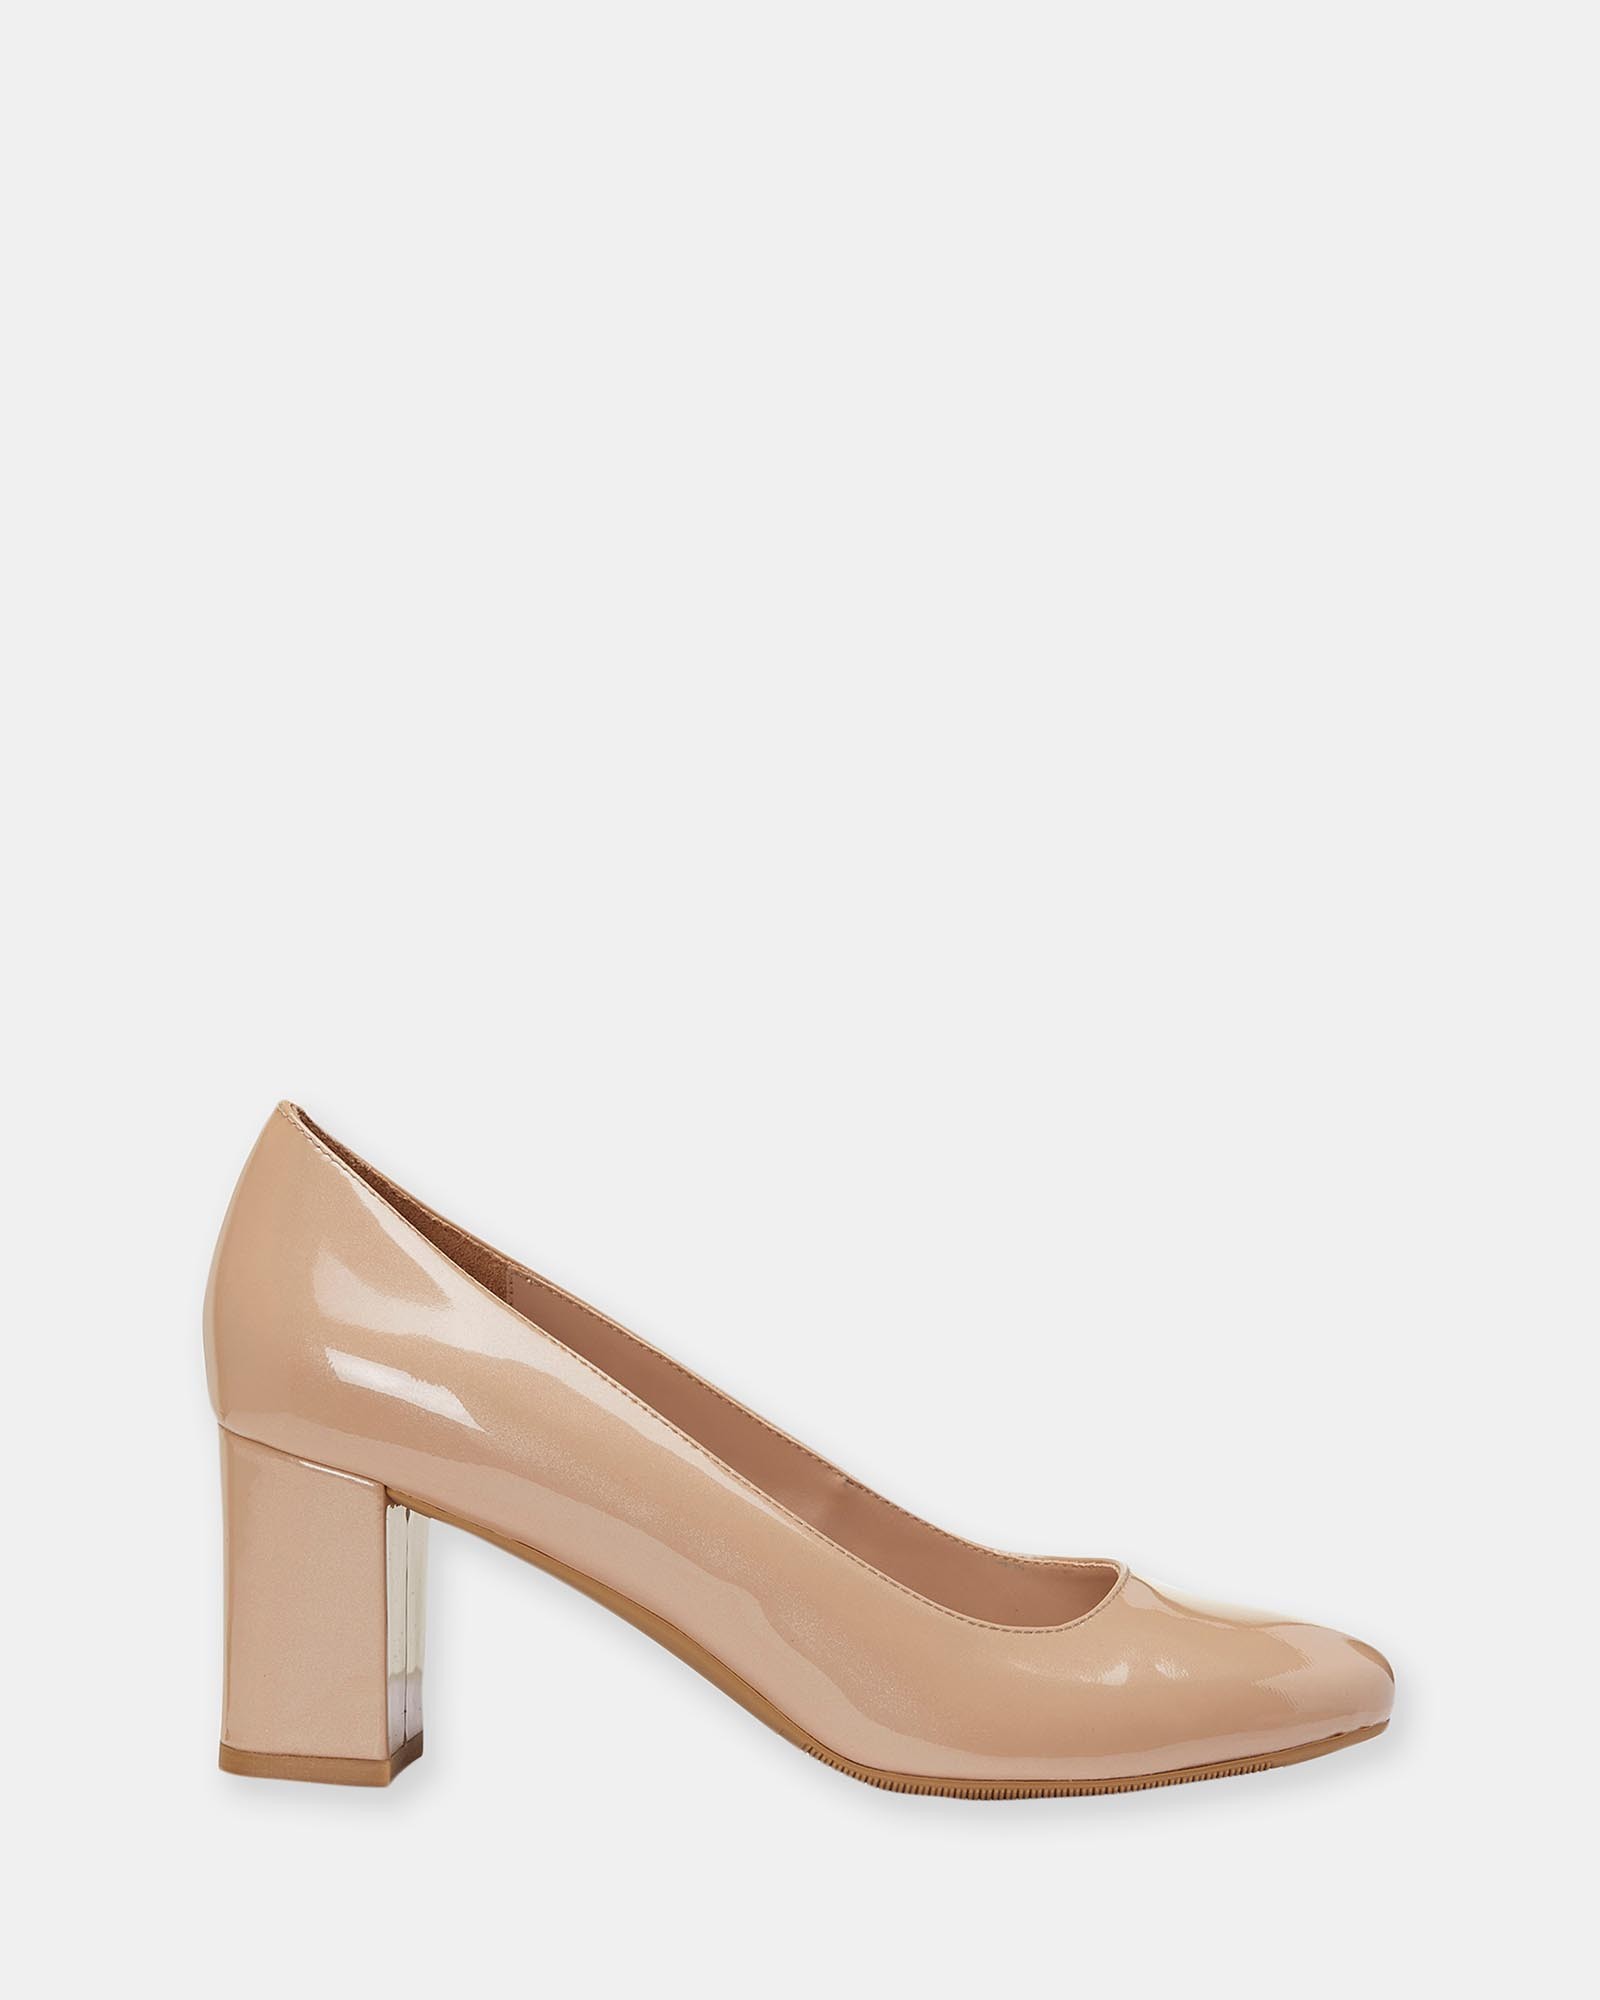 Camilla NUDE PATENT by Sandler | ShoeSales